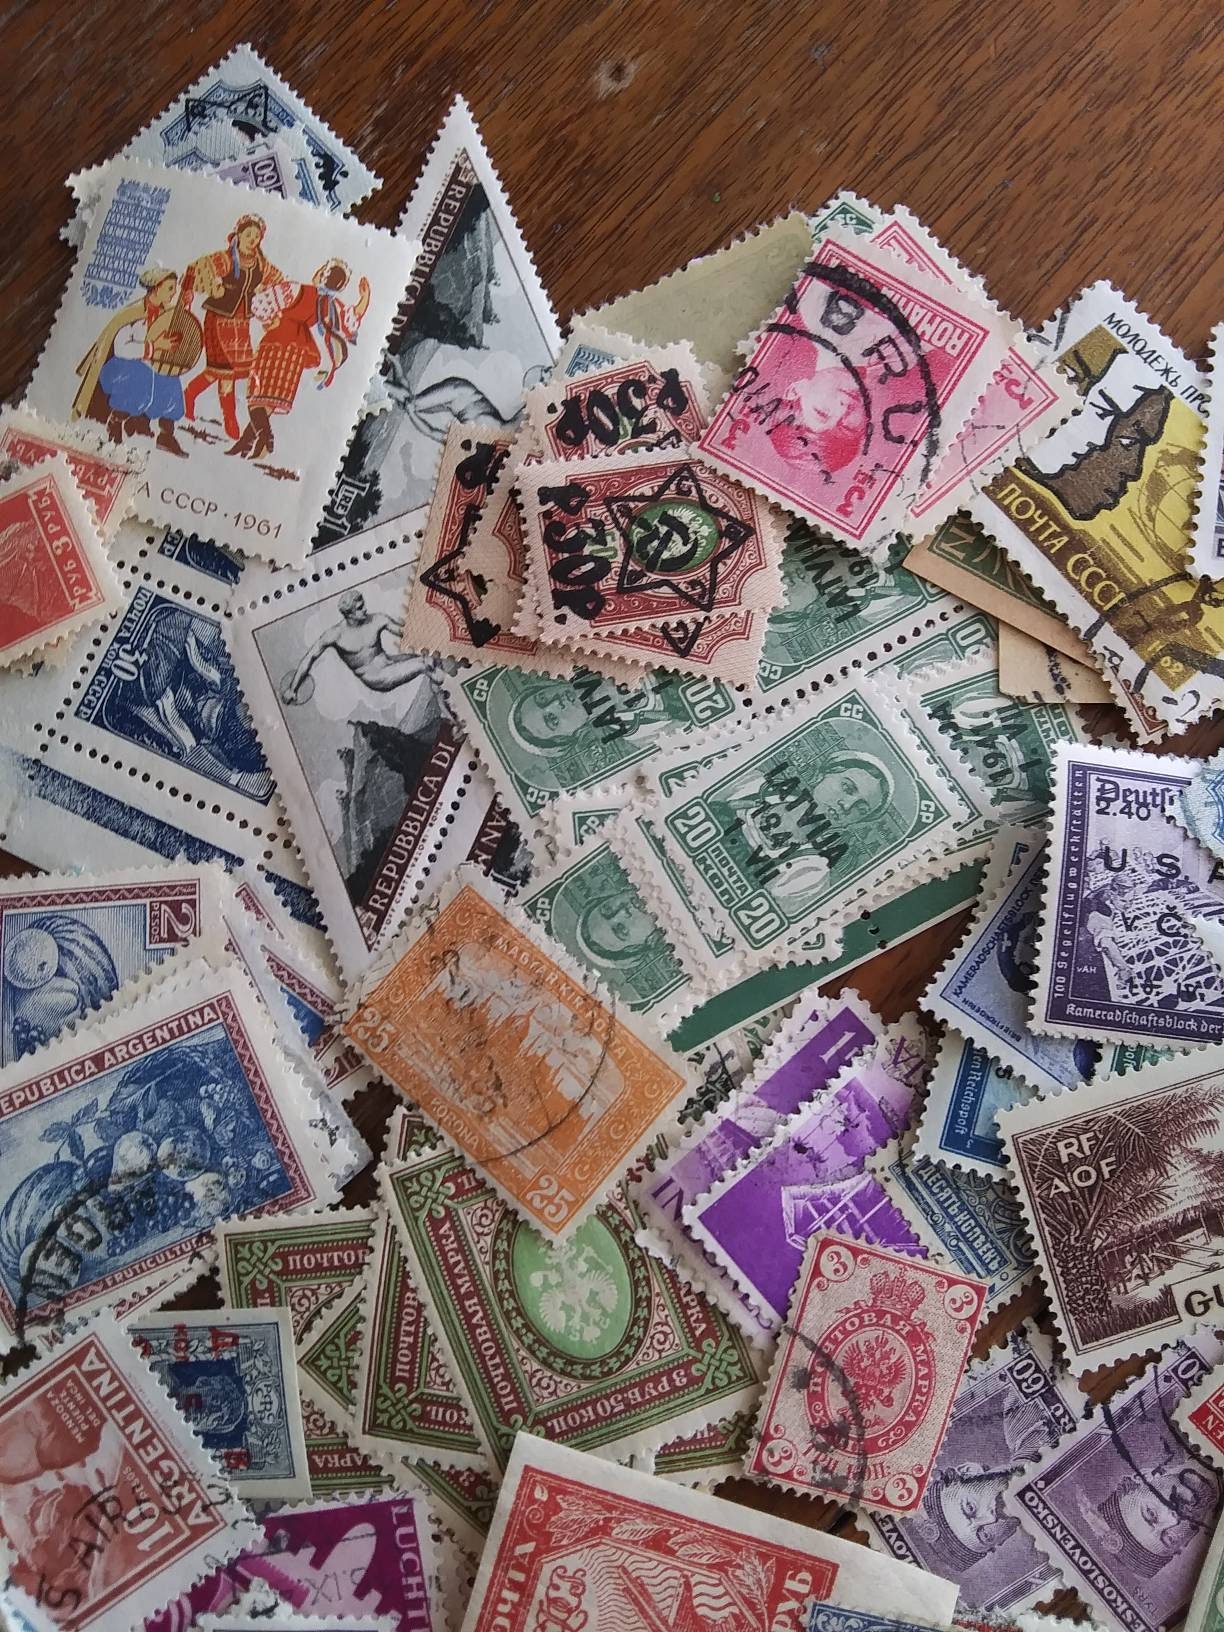 25 Used Rainbow Old British Postage Stamps, All Different, All off